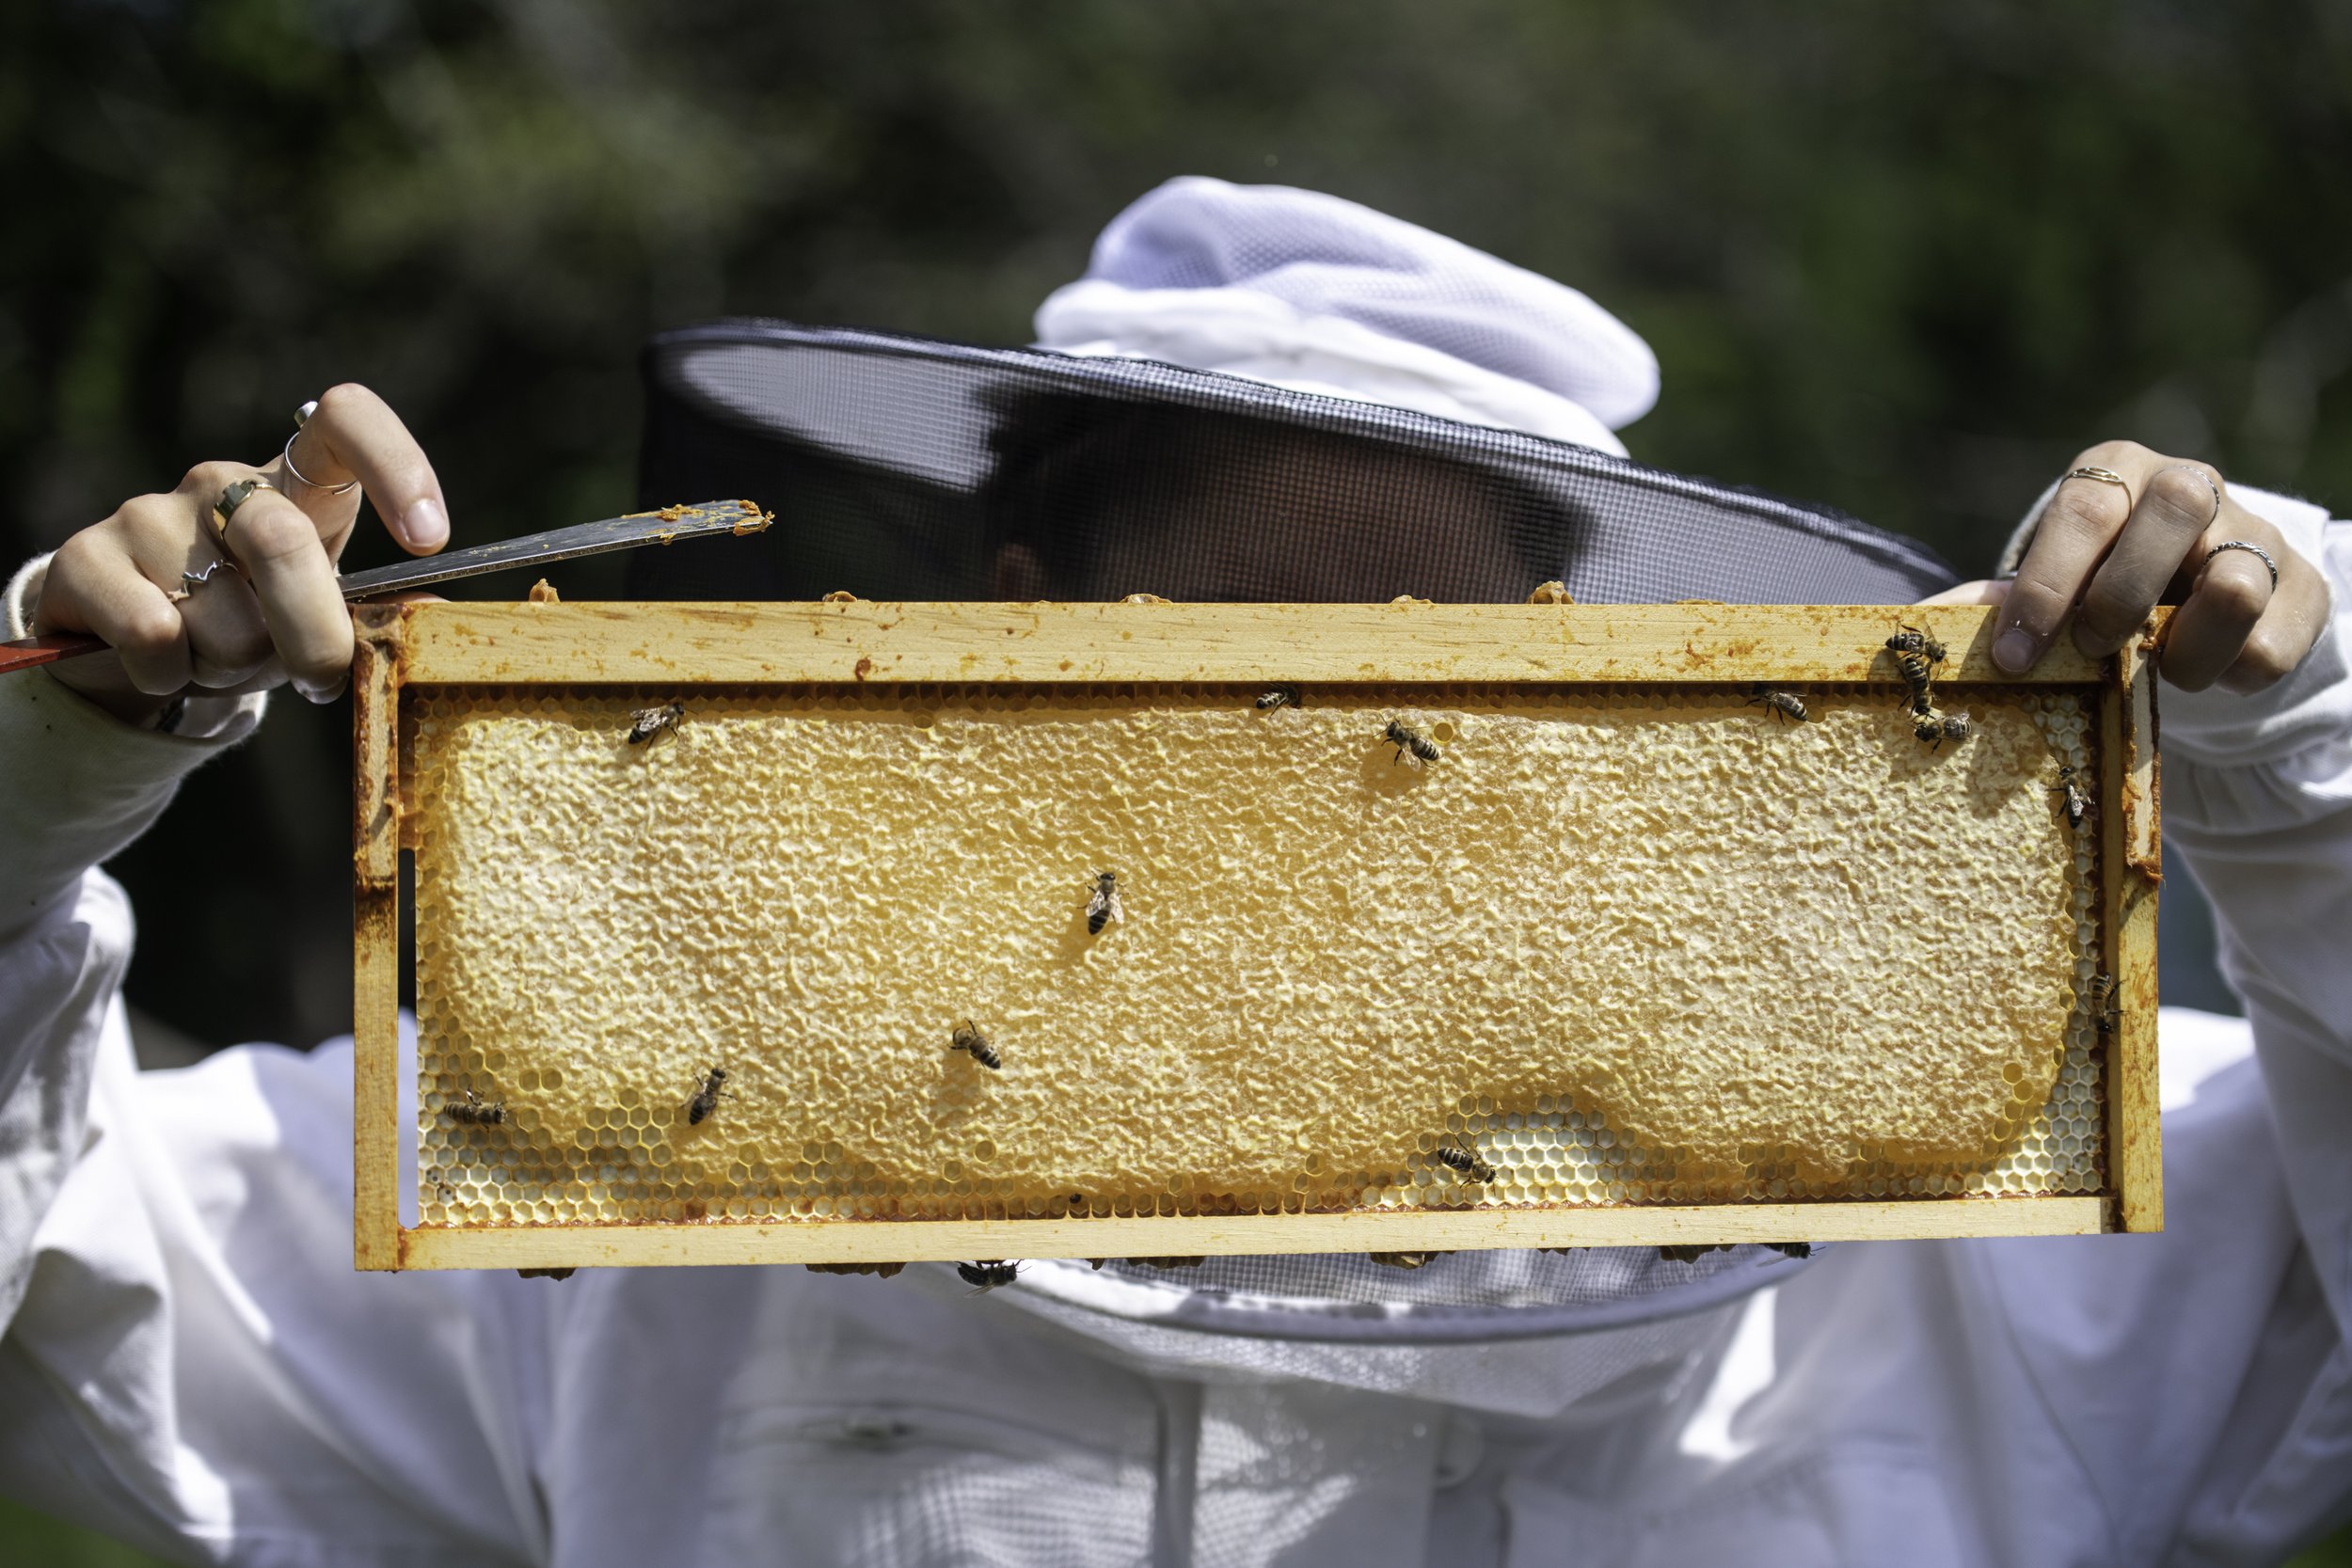  Eva Scott holds up a honey-filled frame in the backyard of her childhood home in Burnt Hills, N.Y. on September 7, 2022. Scott and her father spent the afternoon extracting honey from the summer season.   